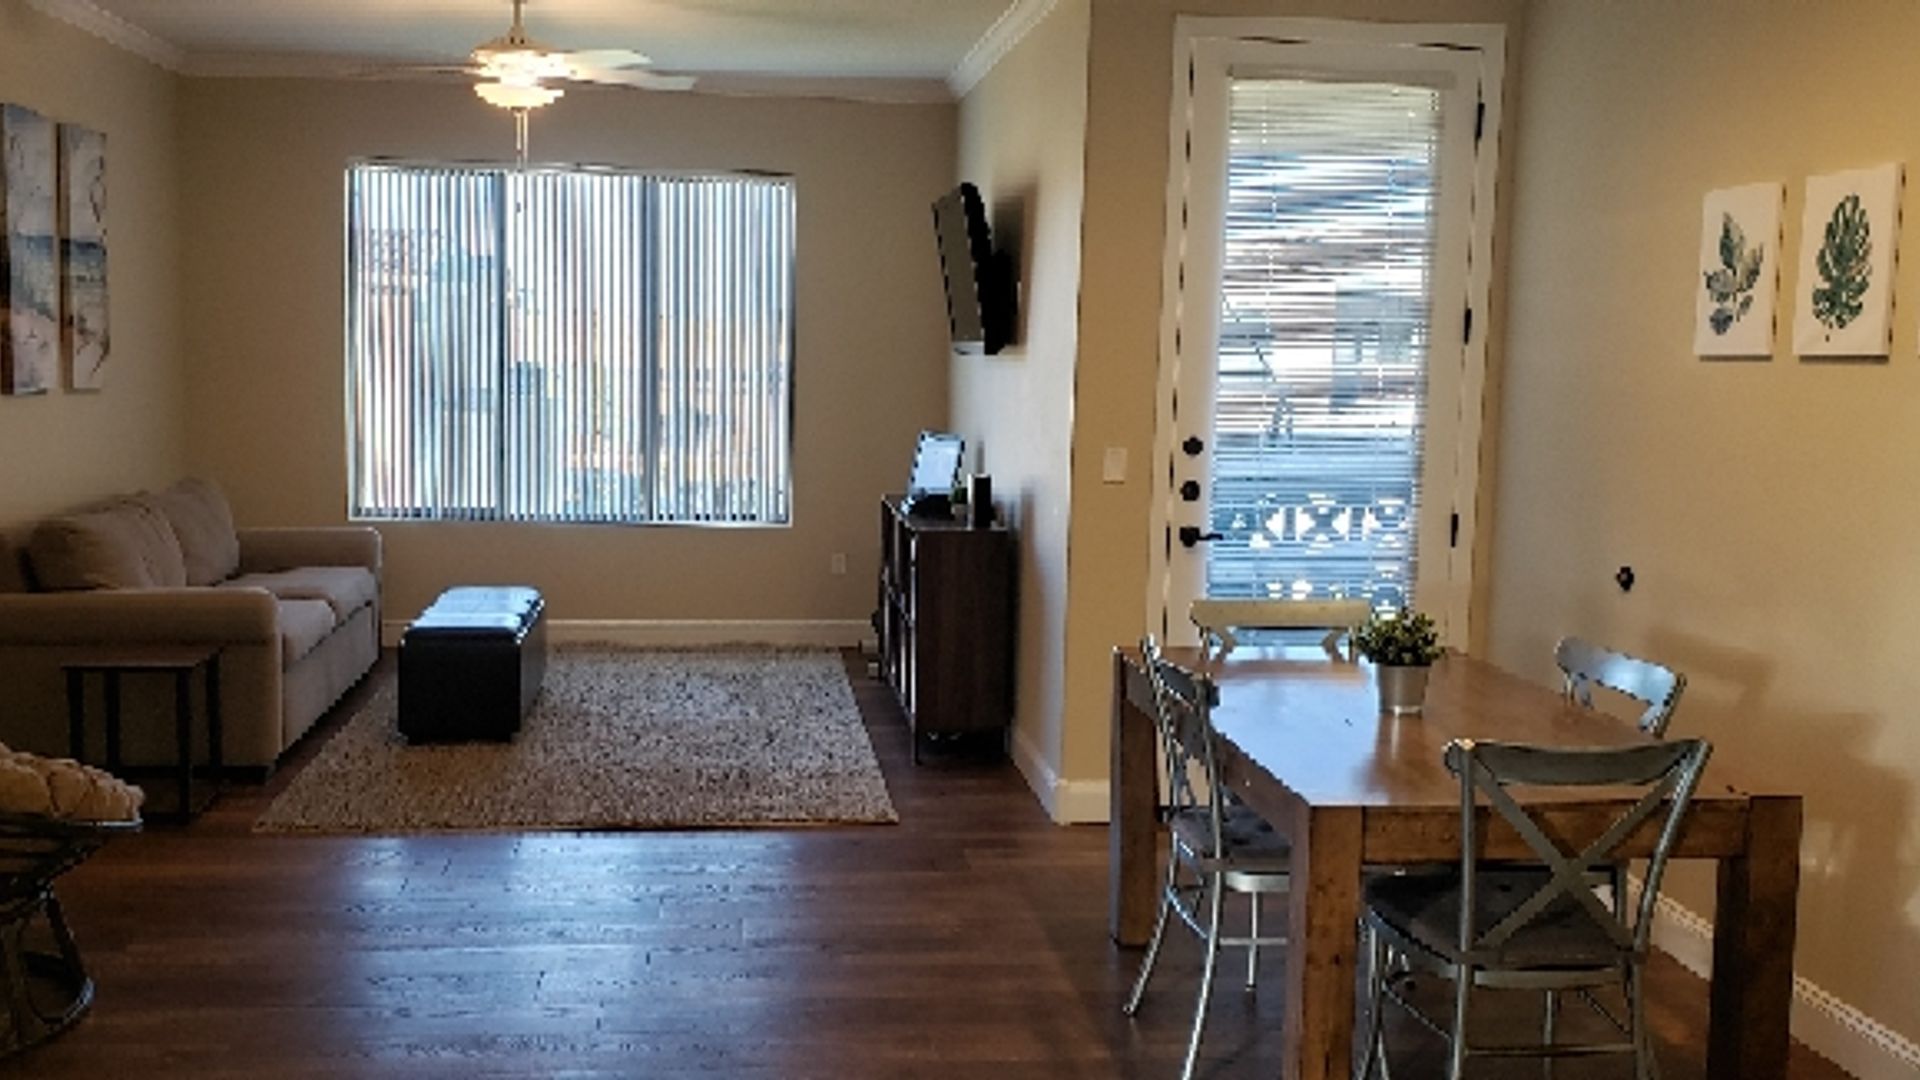 Room in 1 bedroom apt at East Banner Gateway Drive, Mesa, AZ 85206, USA 16945649 Rentberry